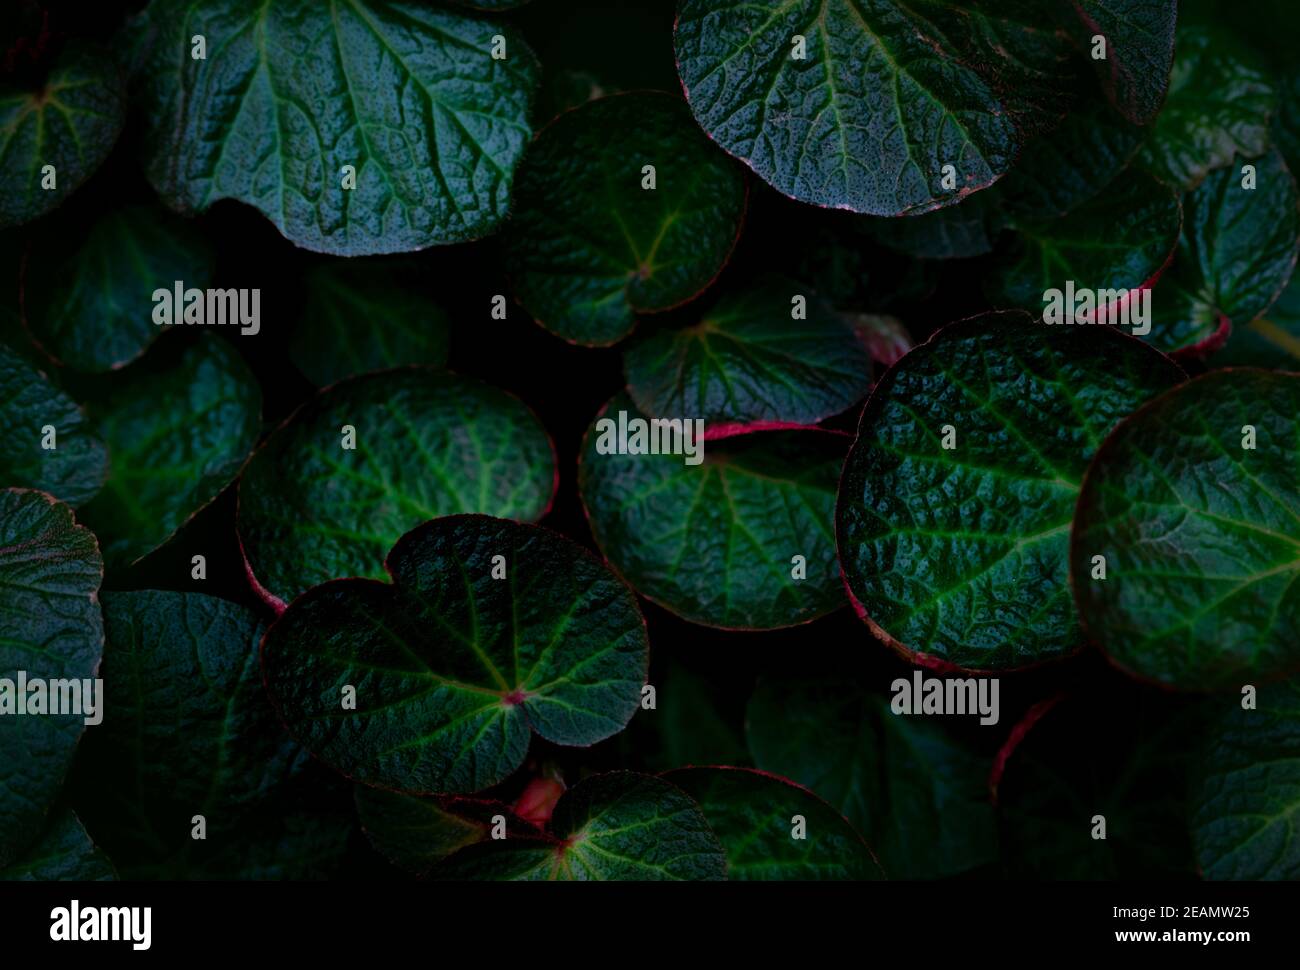 Green round leaf texture on dark background. Close-up detail of begonia leaves. House plant. Indoor plants. Begonia leaf for home decoration. Wallpaper for spa or mental health and mind therapy. Stock Photo